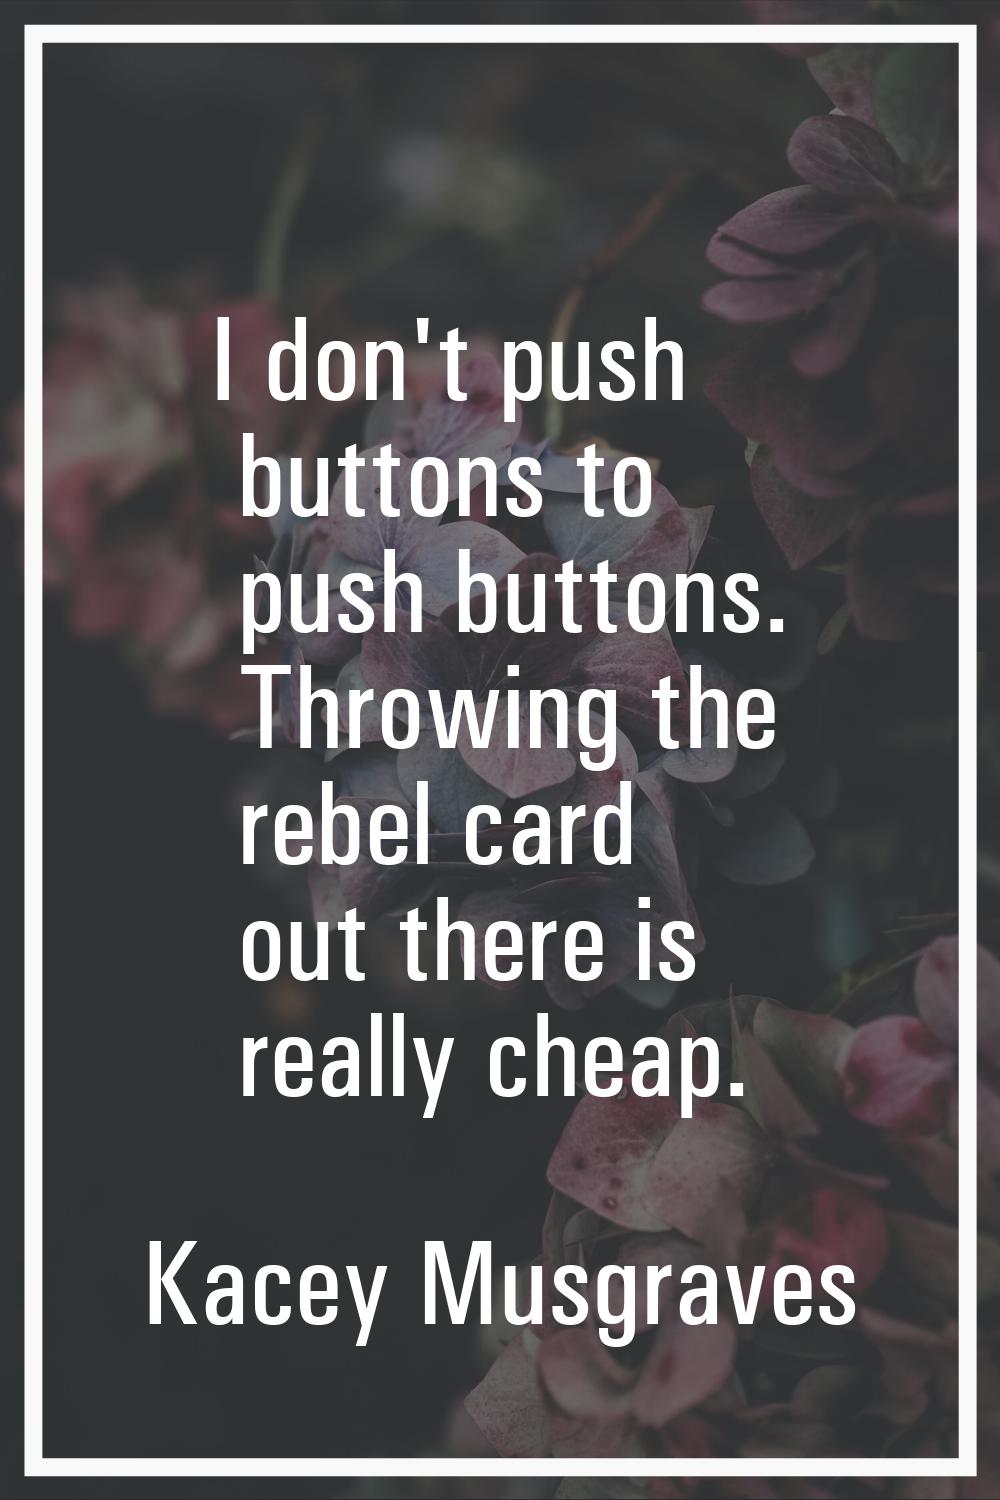 I don't push buttons to push buttons. Throwing the rebel card out there is really cheap.